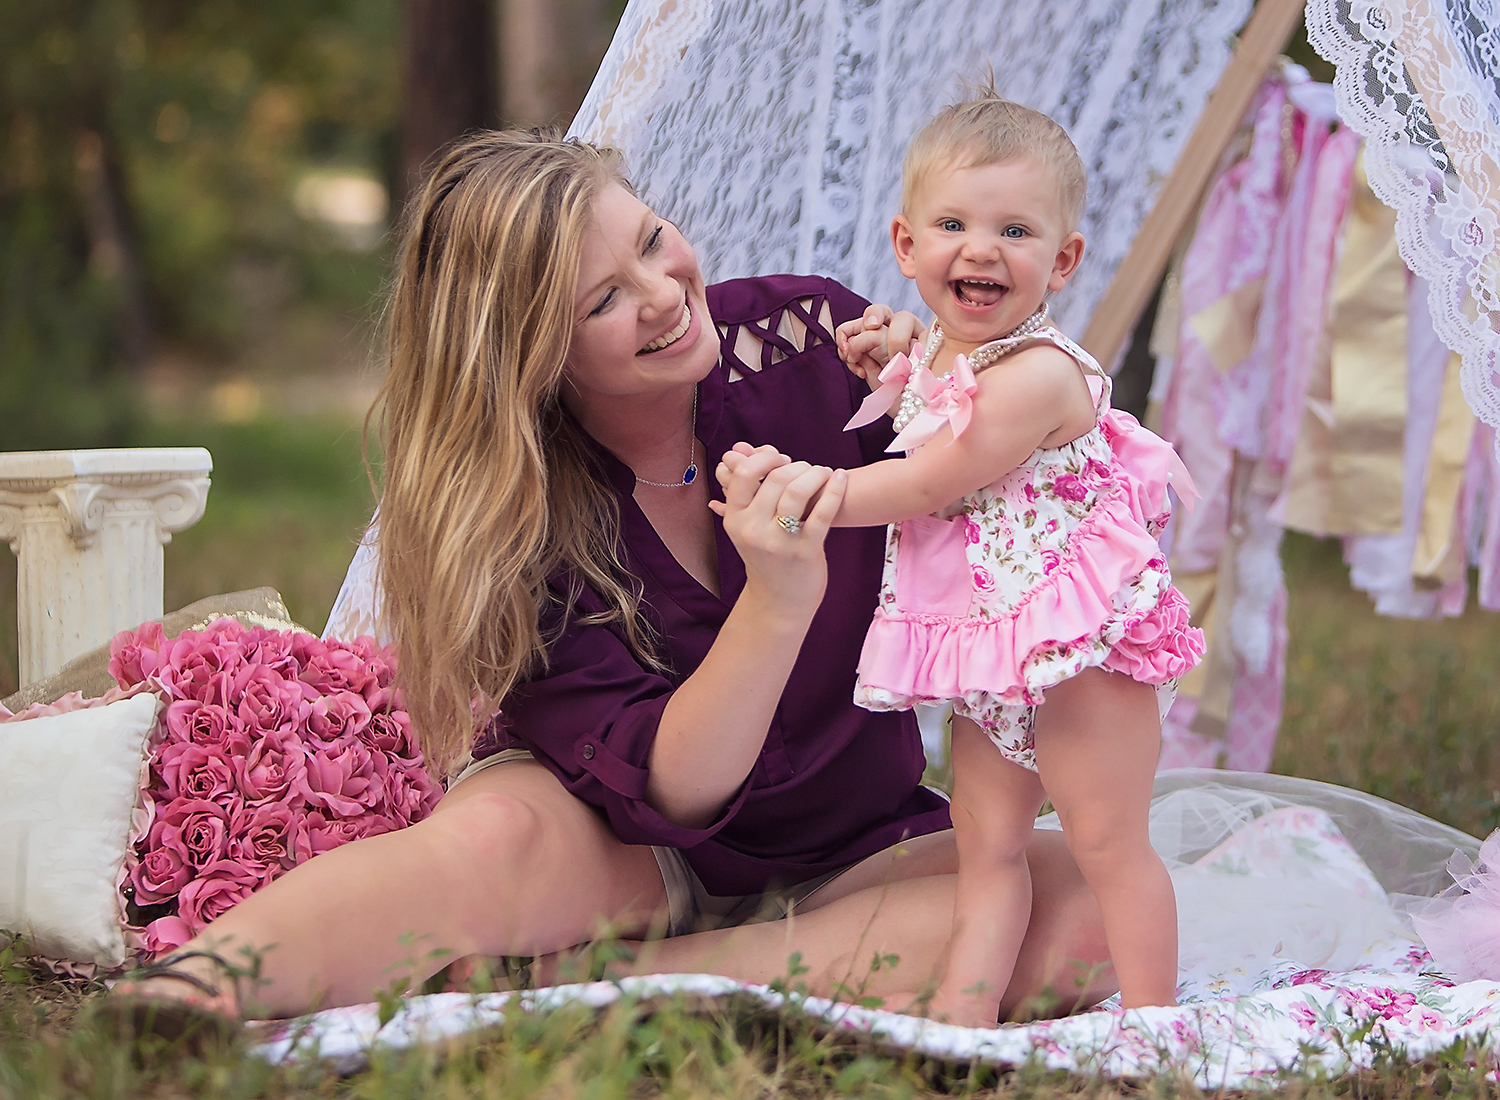 the-woodlands-texas-houston-spring-cypress-tomball-childrens-portraits-photography-session-sunset-first-birthday-lace-tent-props-cake-smash-_8704.jpg